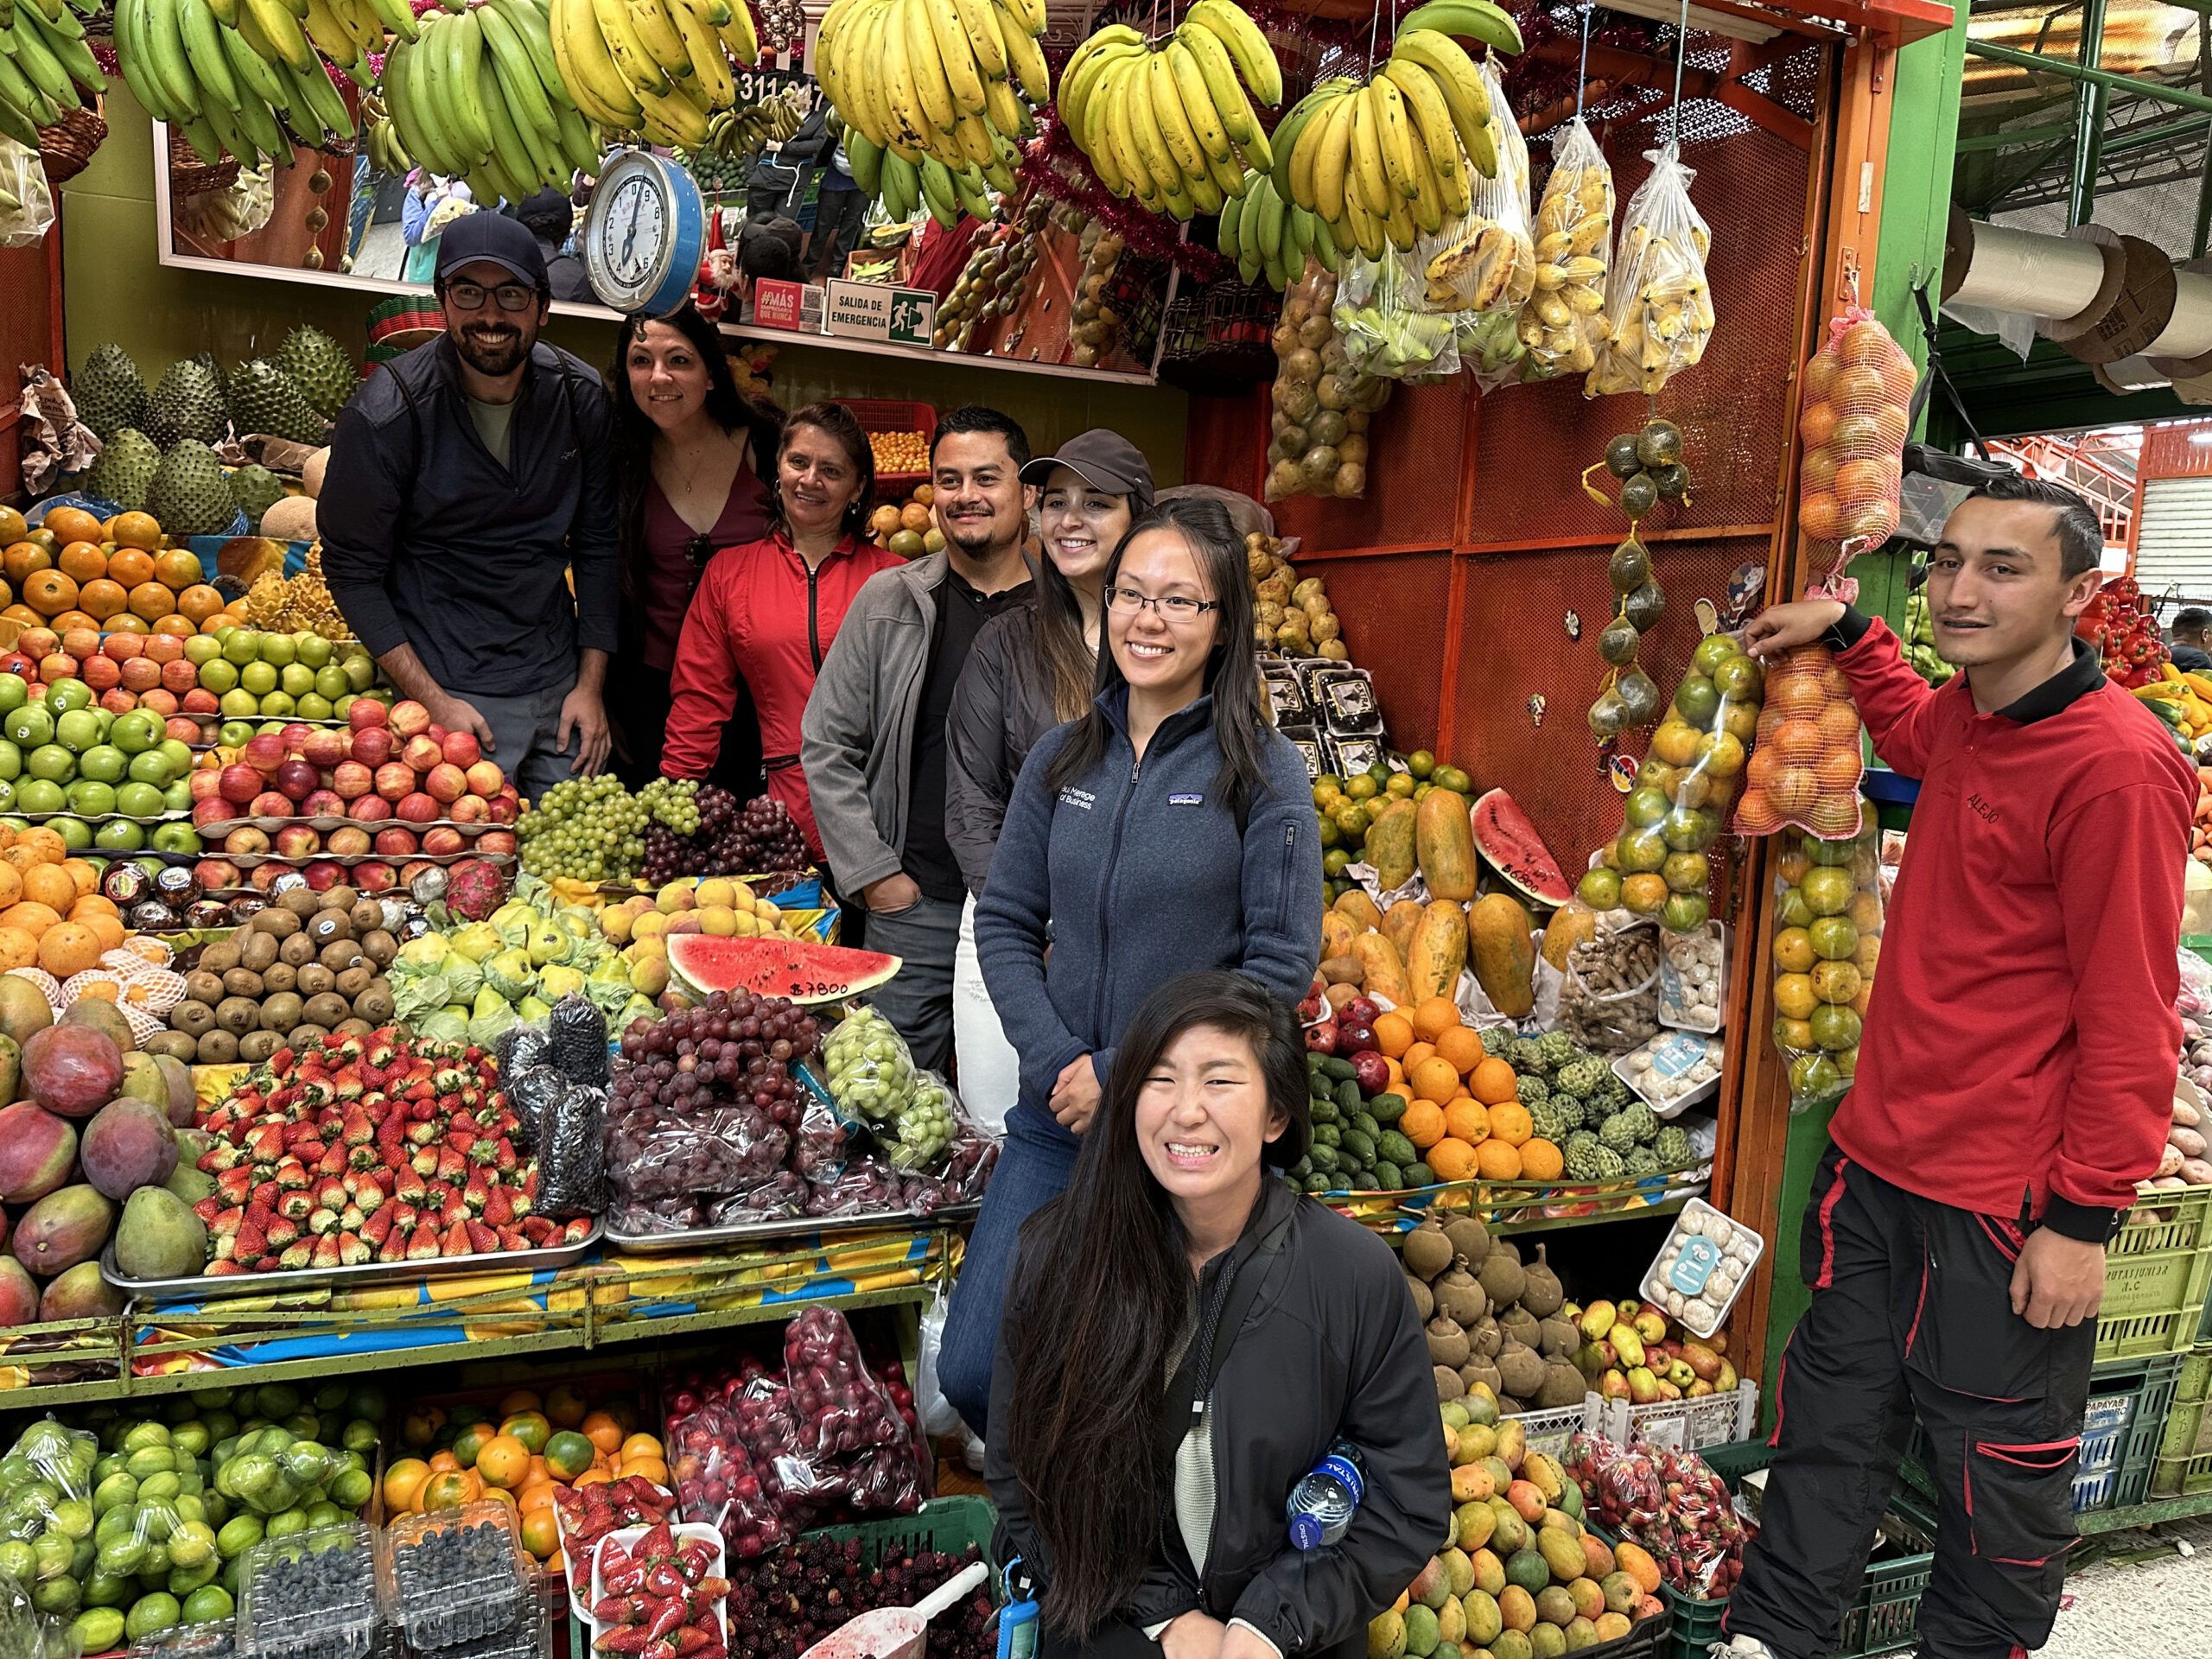 A group of people posing for a photo in front of a colorful fruit stand at a market in Bogotá, surrounded by various fruits such as bananas, grapes, apples, and oranges—a vibrant highlight of Bogotá city tours.